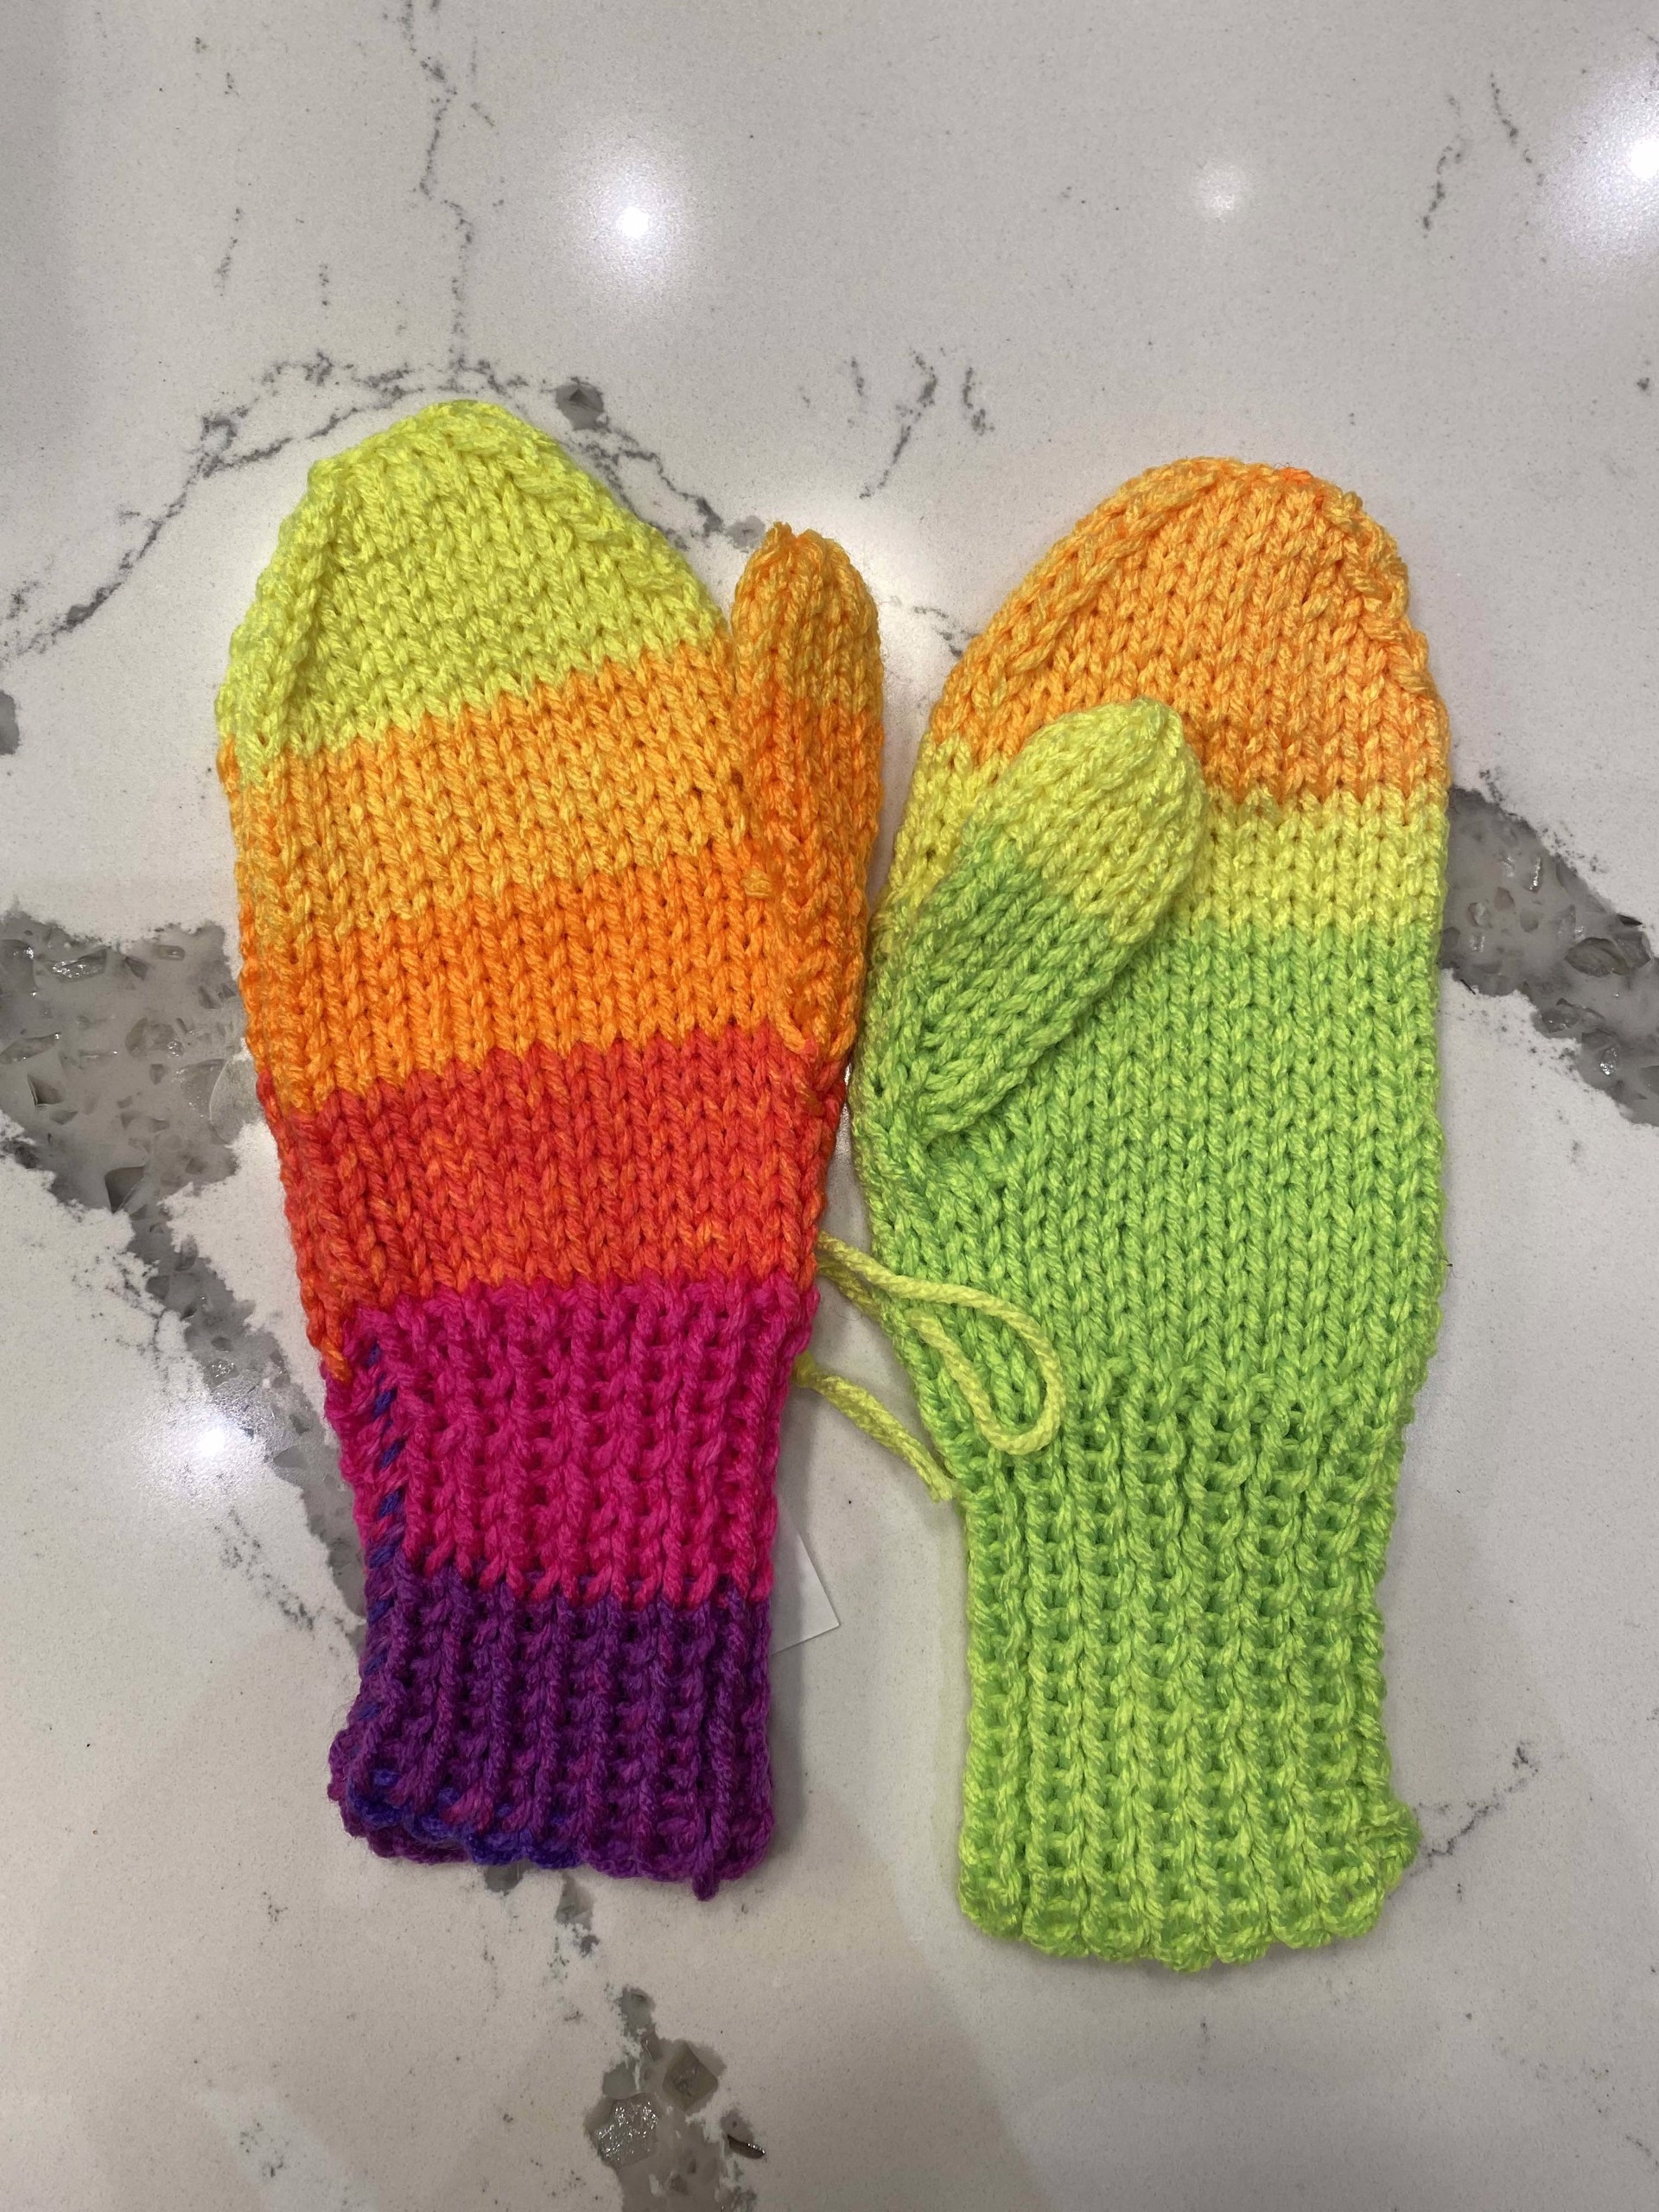 Handmade Mittens - Size 6 by Cathy Miller